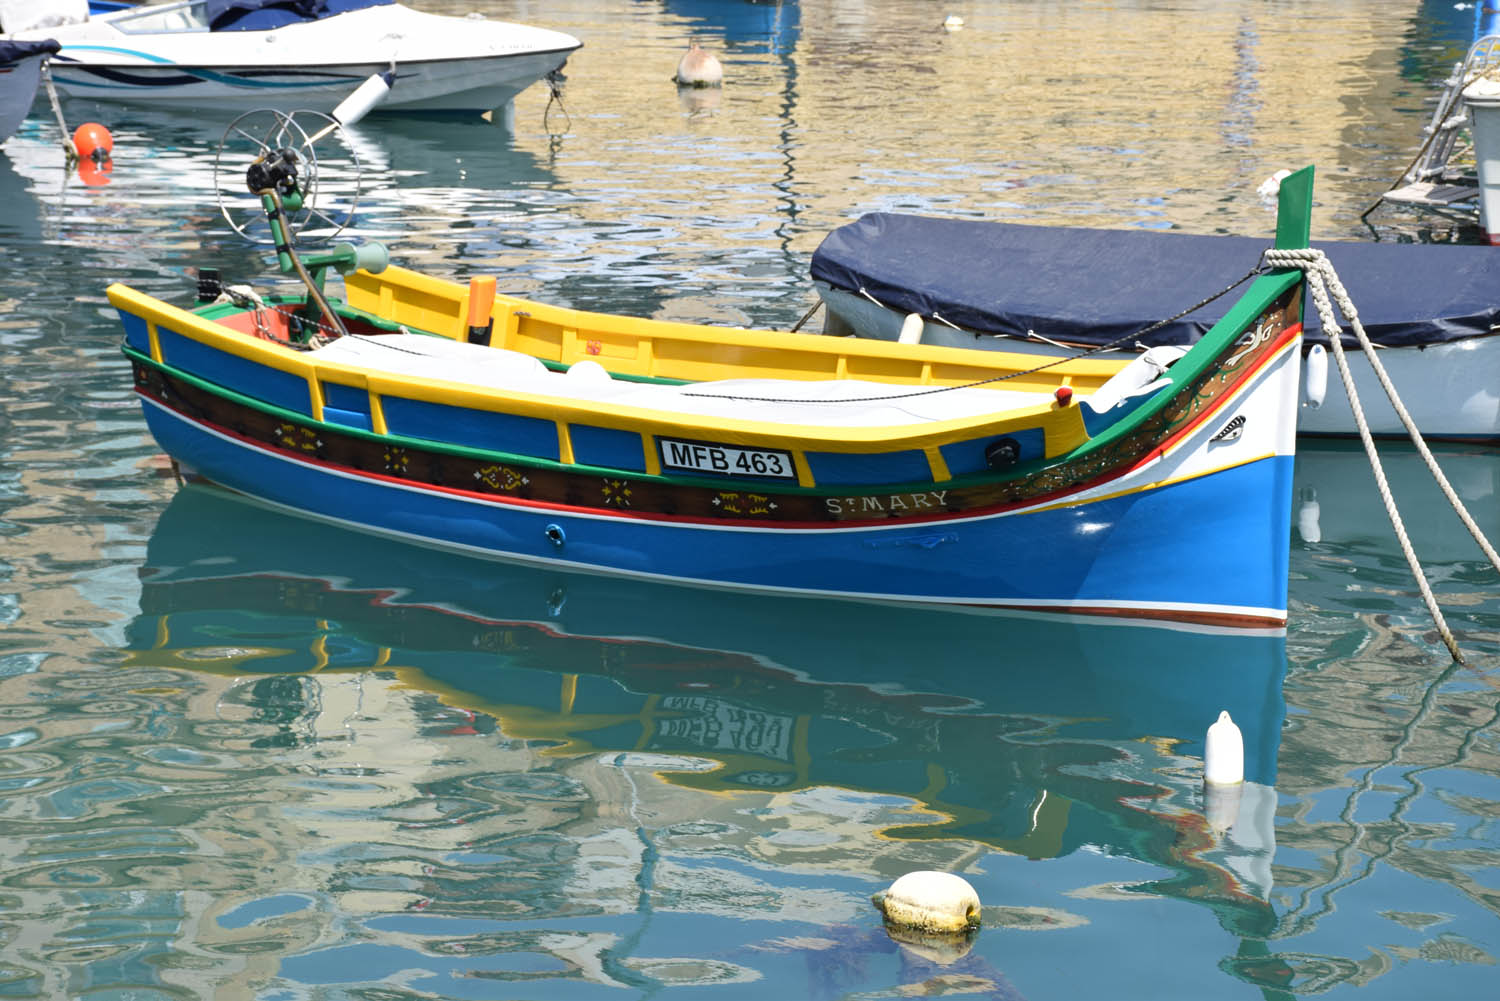 Typical Maltese fisherman's boat with luzzu eyes in Spinola Bay, St. Julien's, Malta